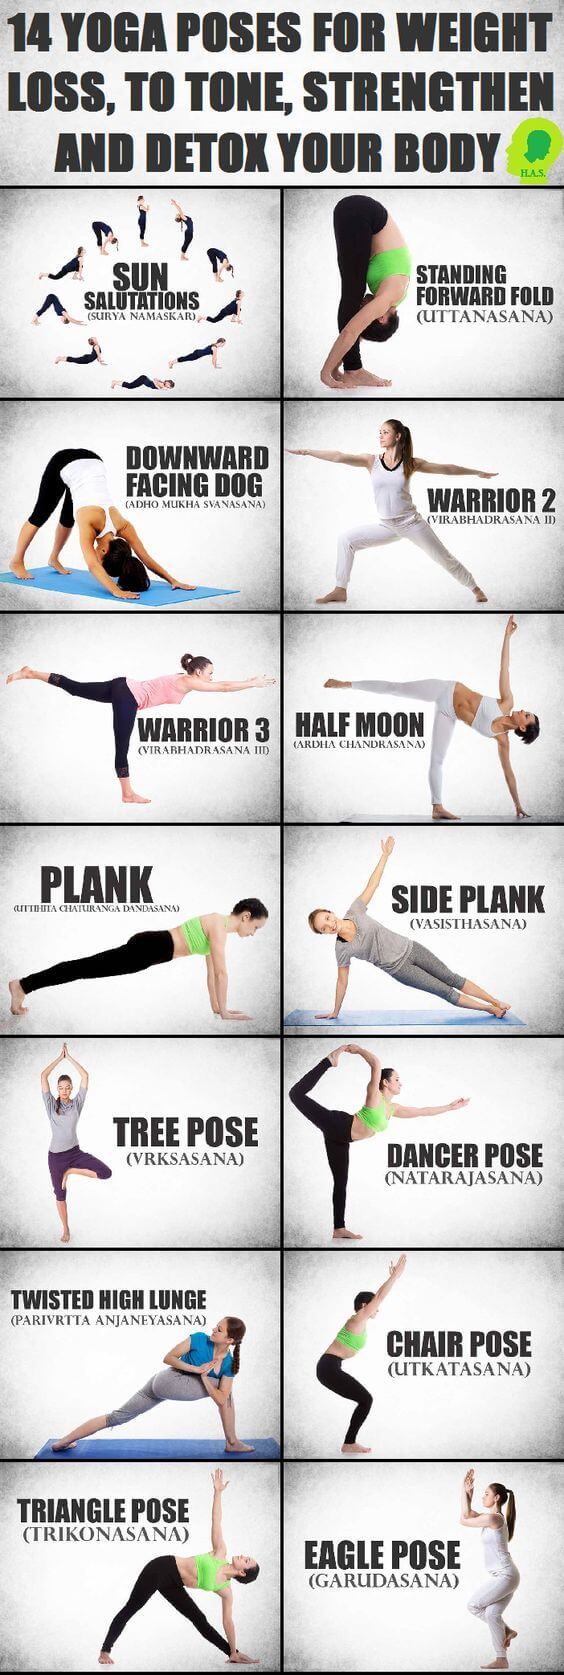 14 Yoga Poses for Weight Loss, To Tone, Strengthen and Detox Your Body